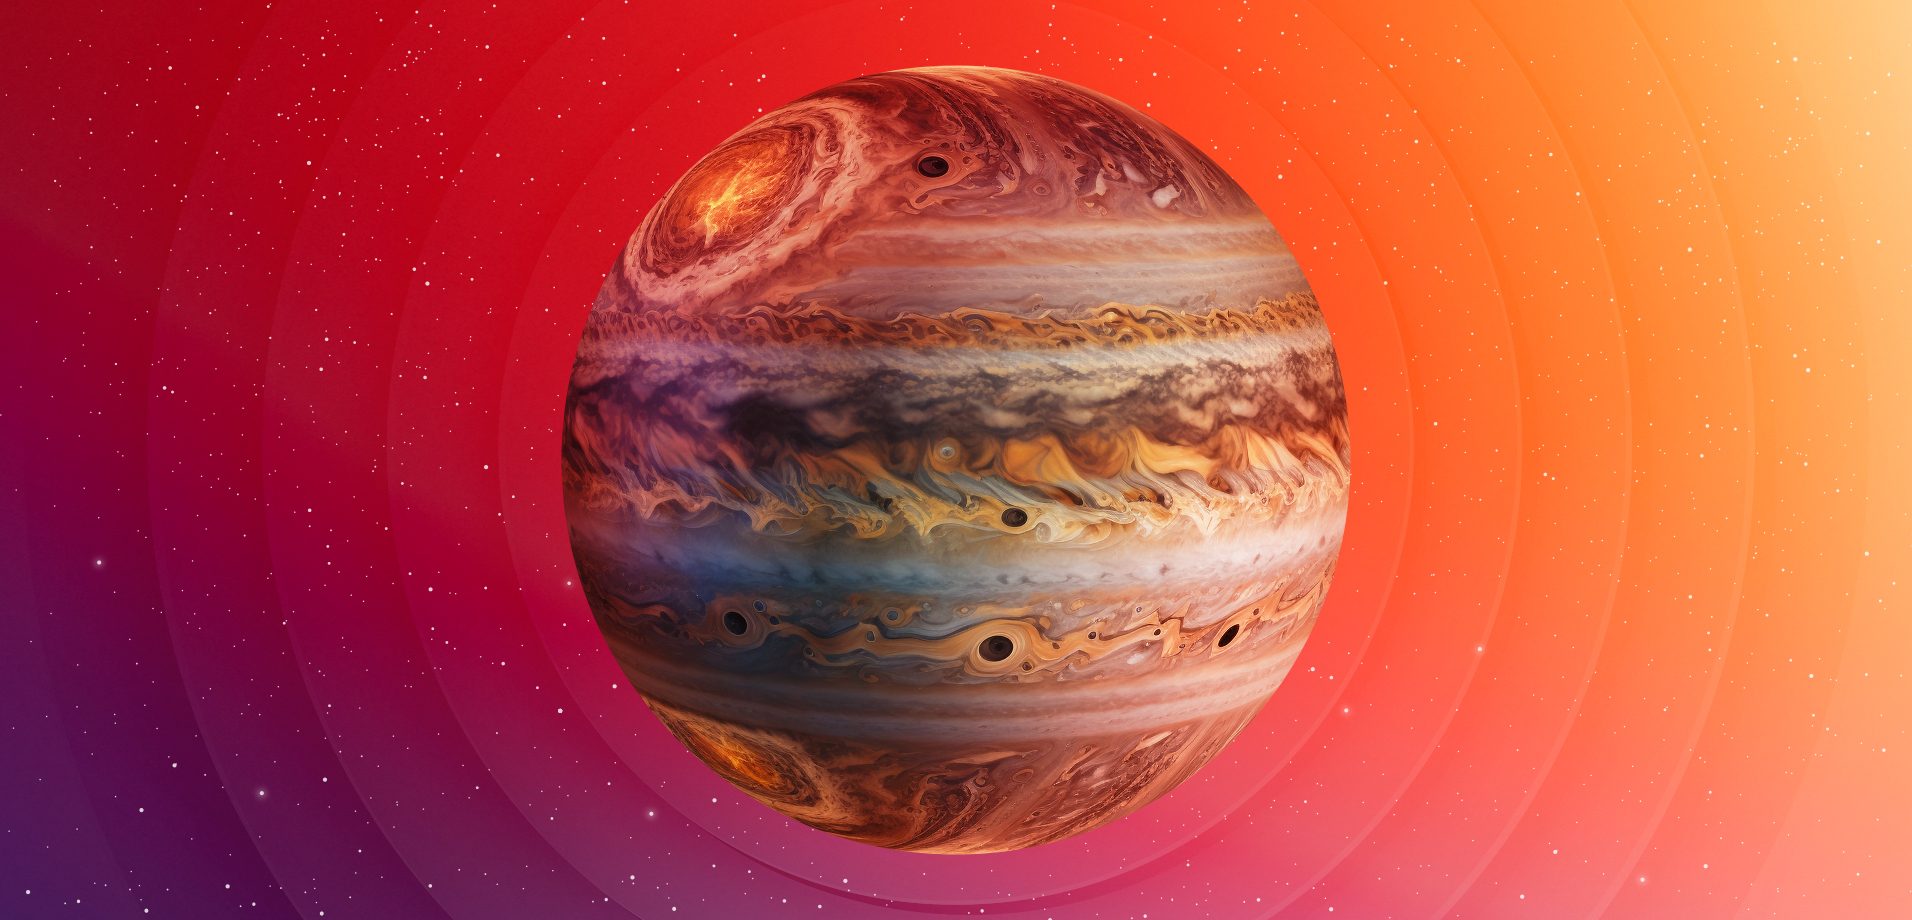 The severe planet: What colour is Jupiter?